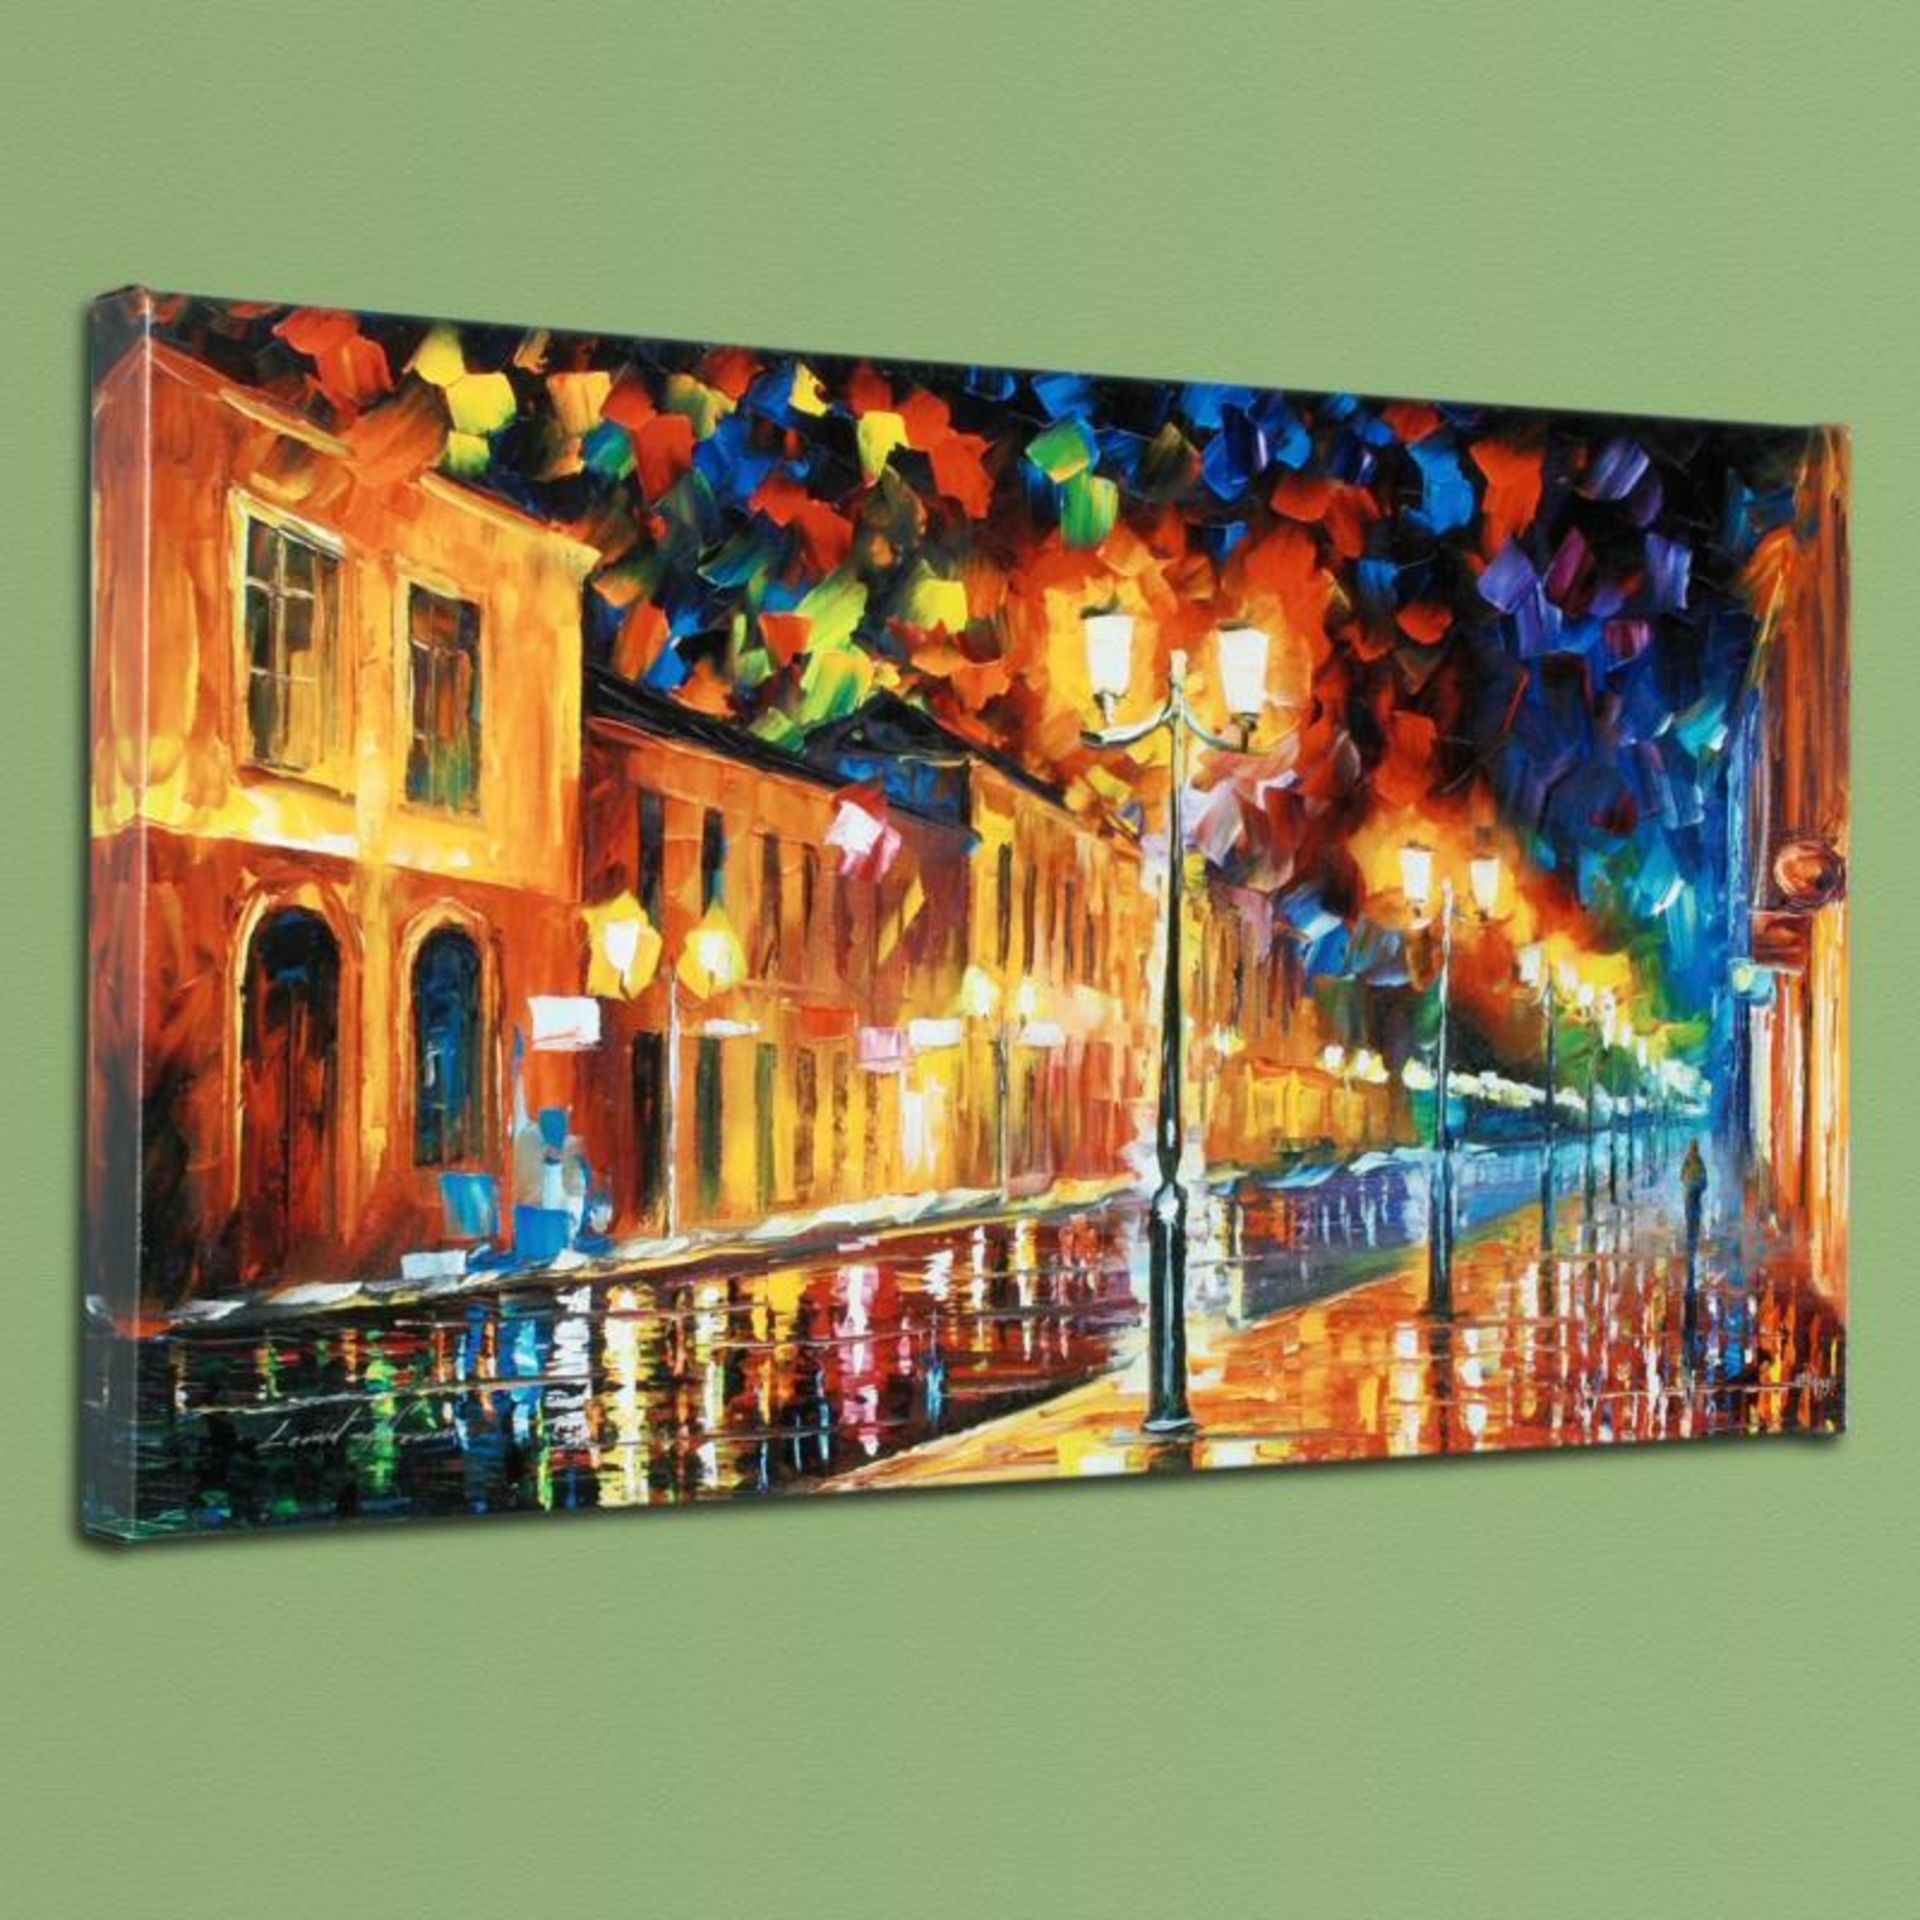 Leonid Afremov (1955-2019) "Infinity" Limited Edition Giclee on Canvas, Numbered - Image 3 of 3